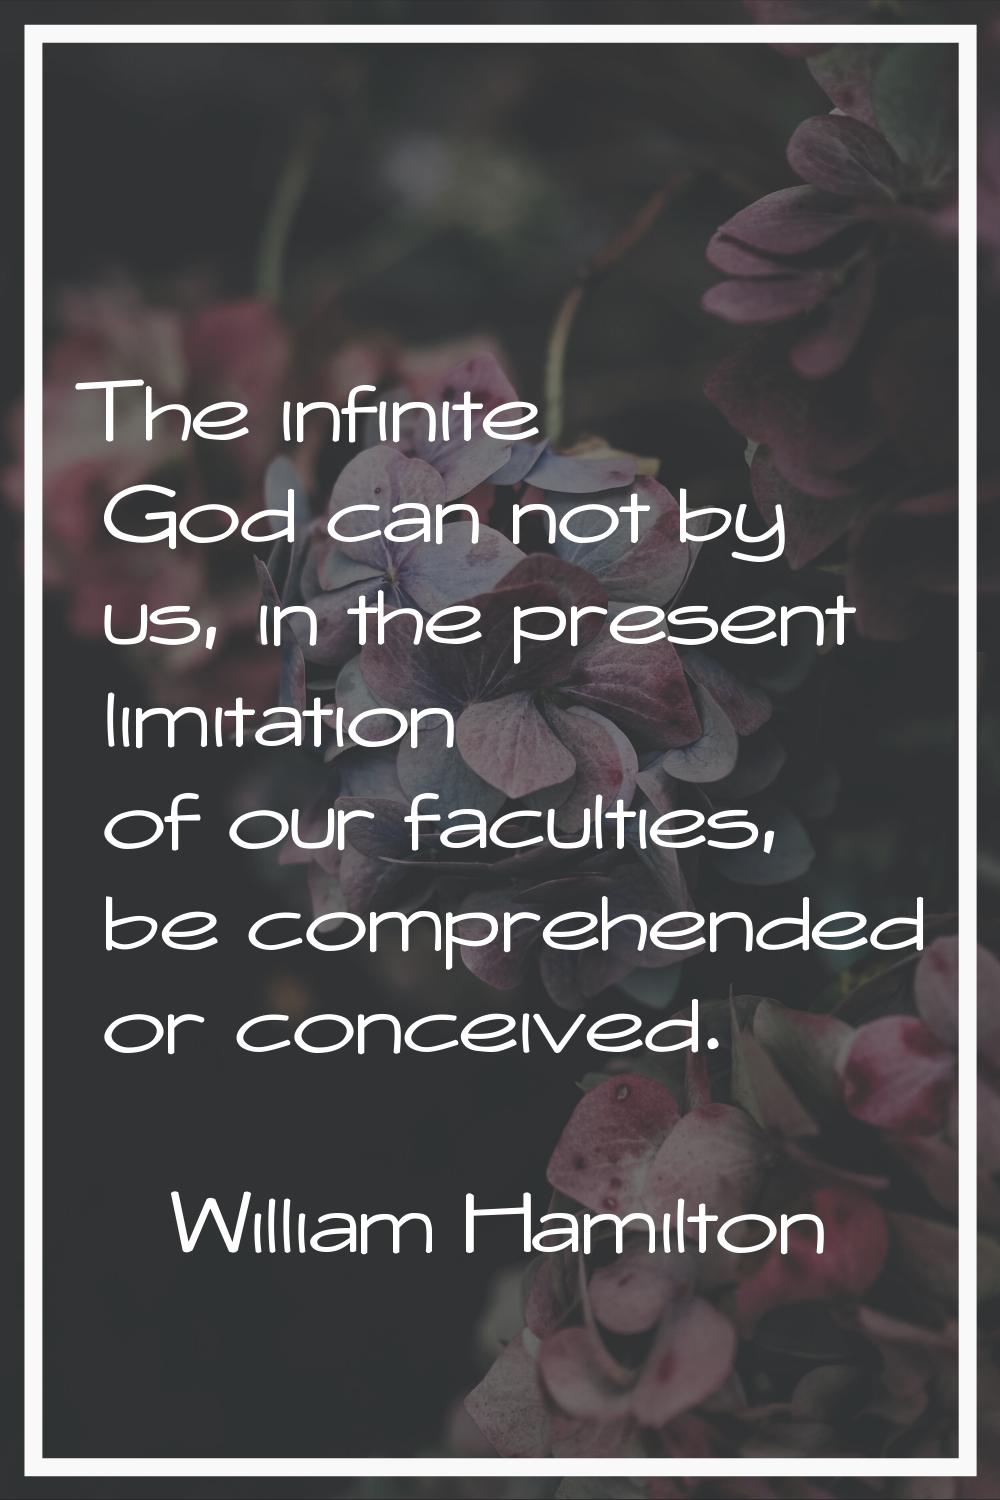 The infinite God can not by us, in the present limitation of our faculties, be comprehended or conc